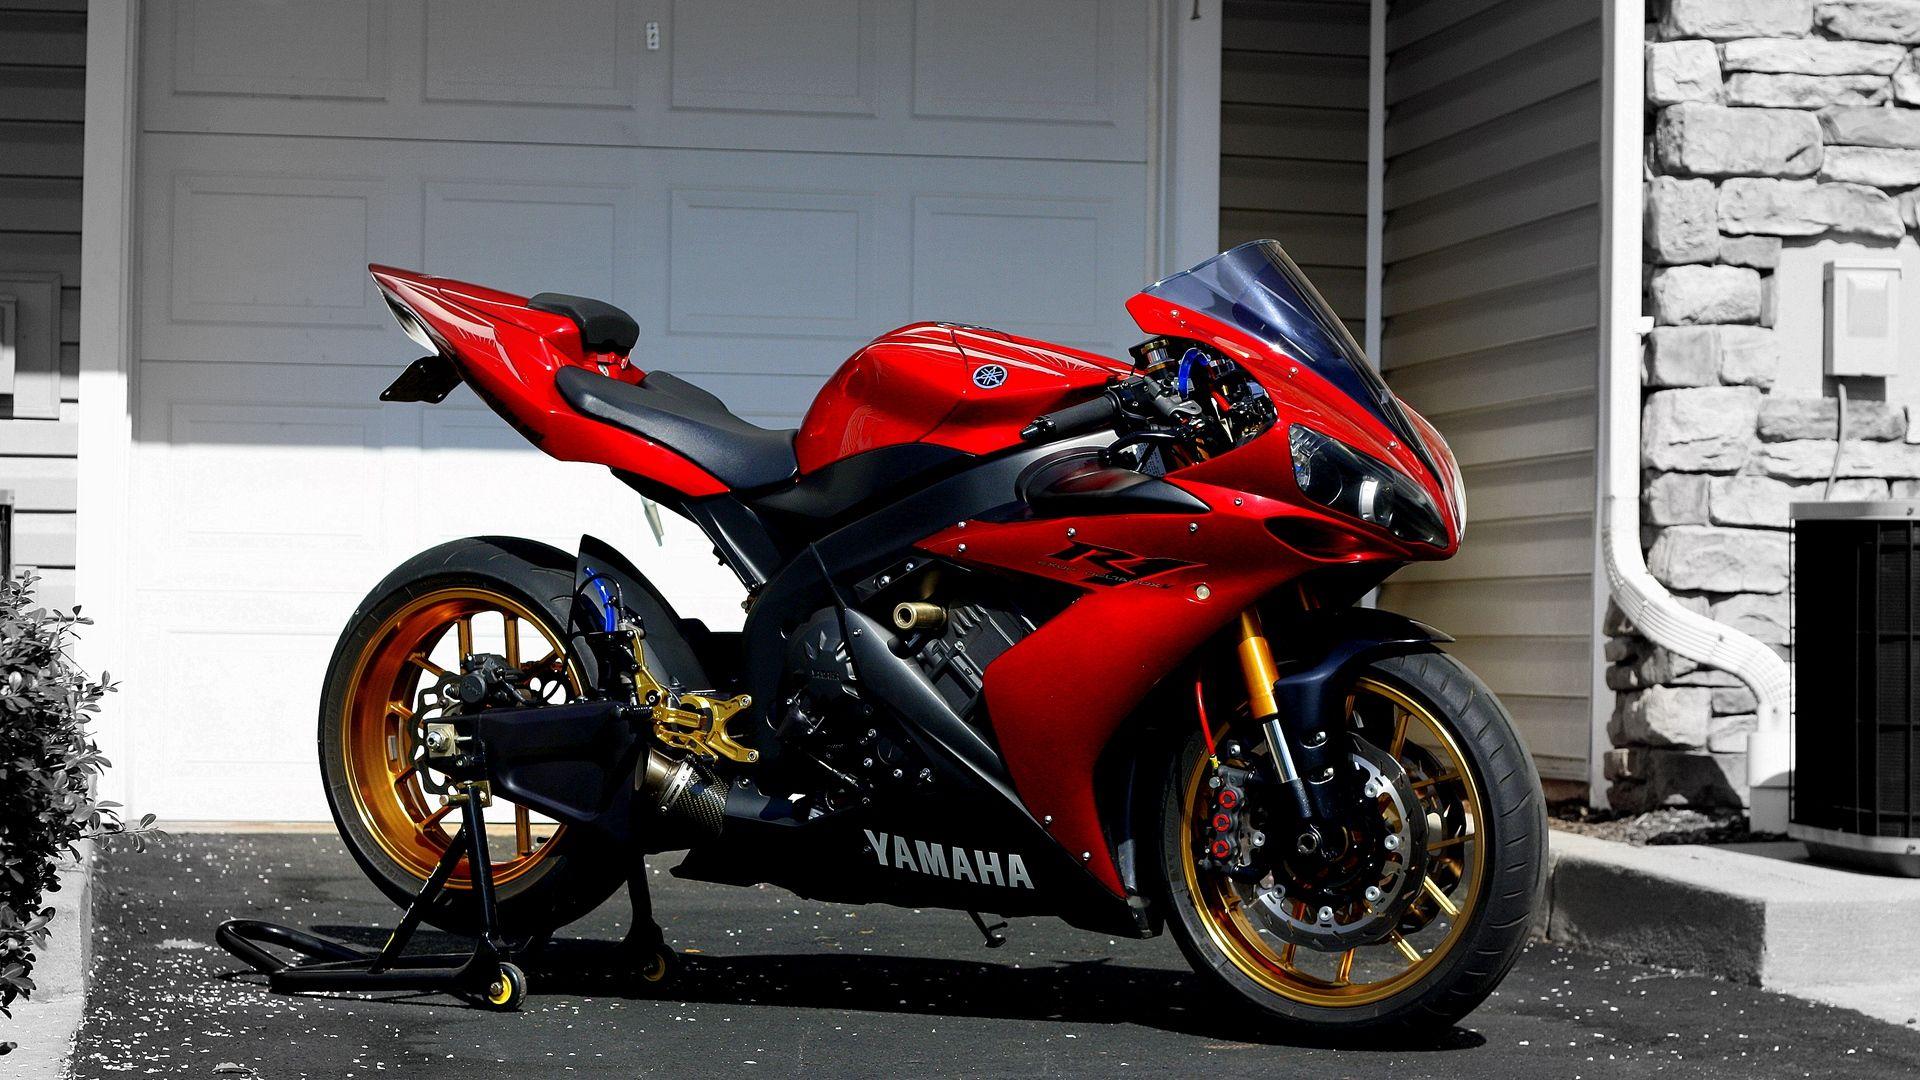 Download wallpaper 1920x1080 yamaha, r red, sportbike full hd, hdtv, fhd, 1080p HD background